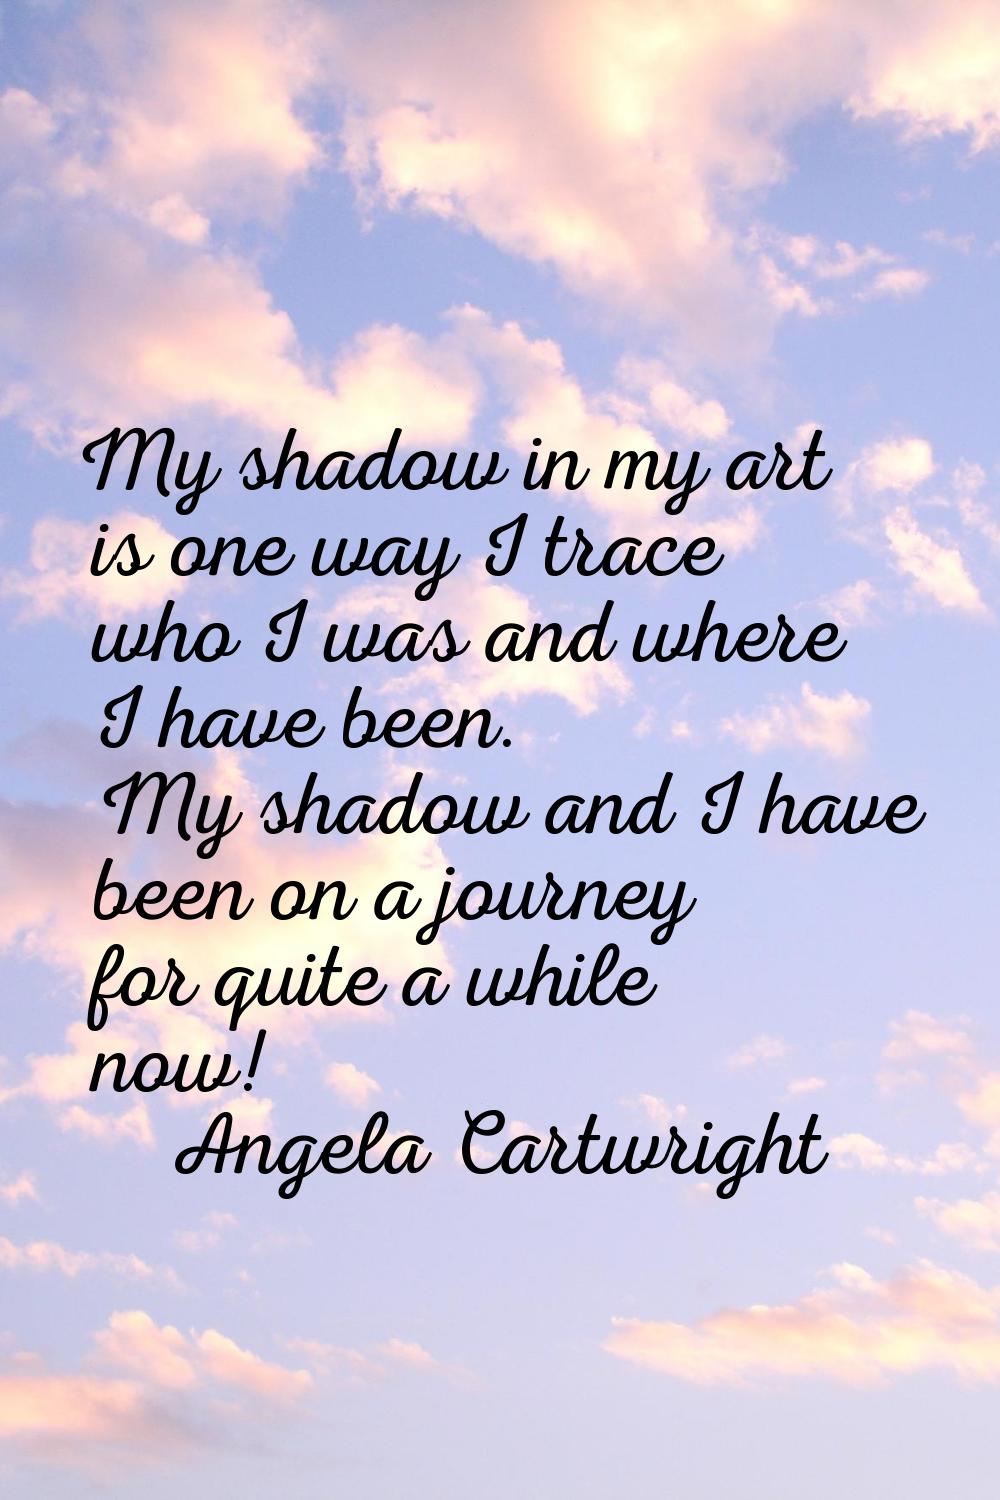 My shadow in my art is one way I trace who I was and where I have been. My shadow and I have been o